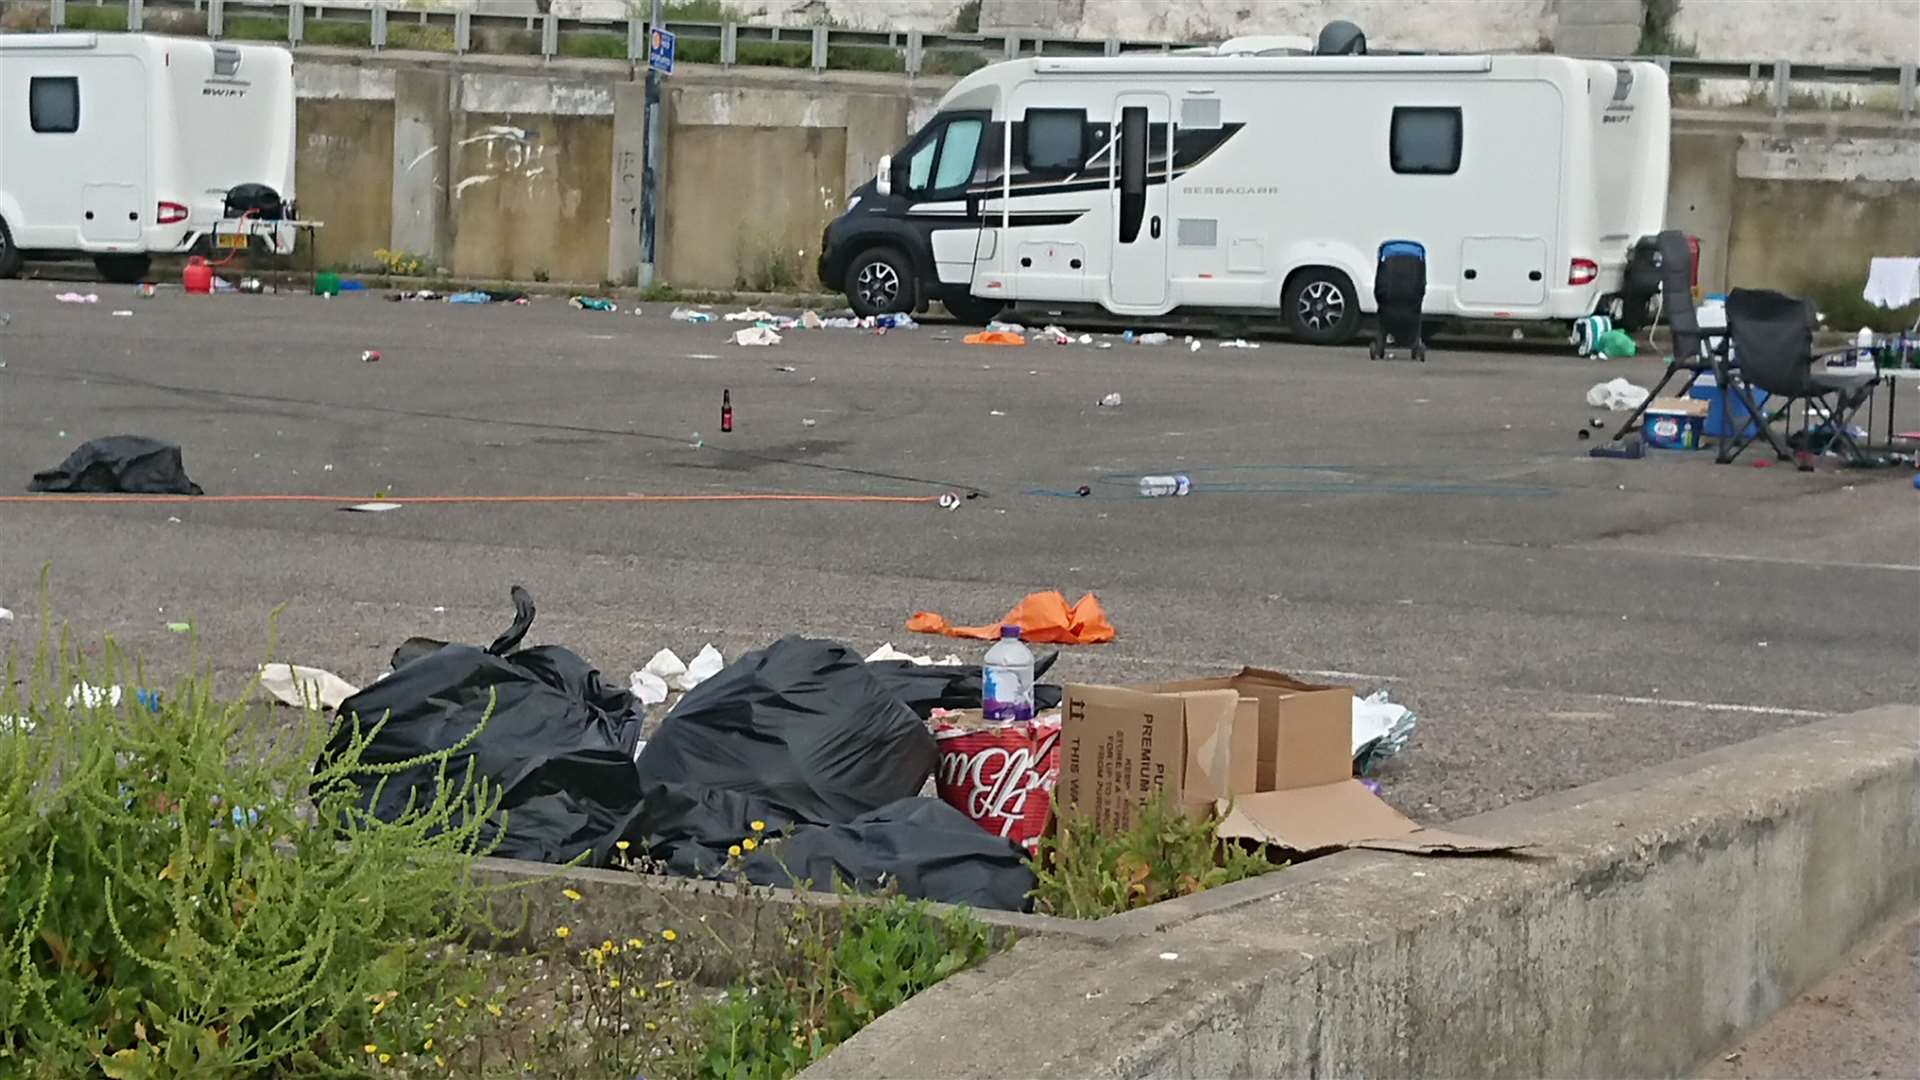 The car park is regularly occupied by travellers. Pic: Andy Smith